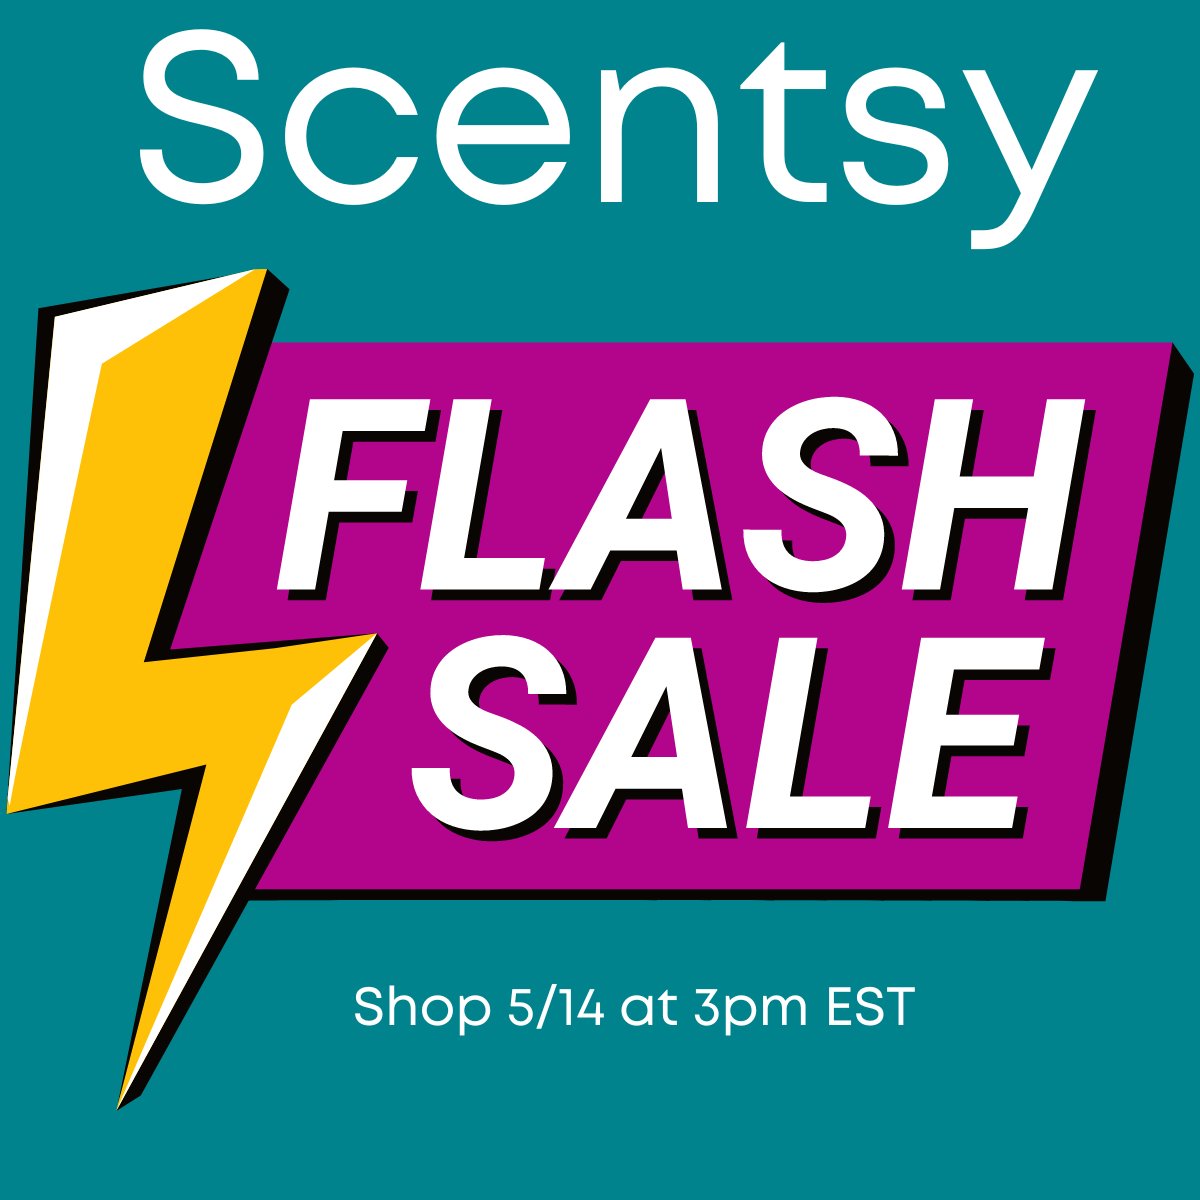 Scentsy Flash Sale reschedule for 5/14 at 3pm EST

Details:incandescentwaxmelts.com/scentsy-may-20…

#Scentsy #Flashsale